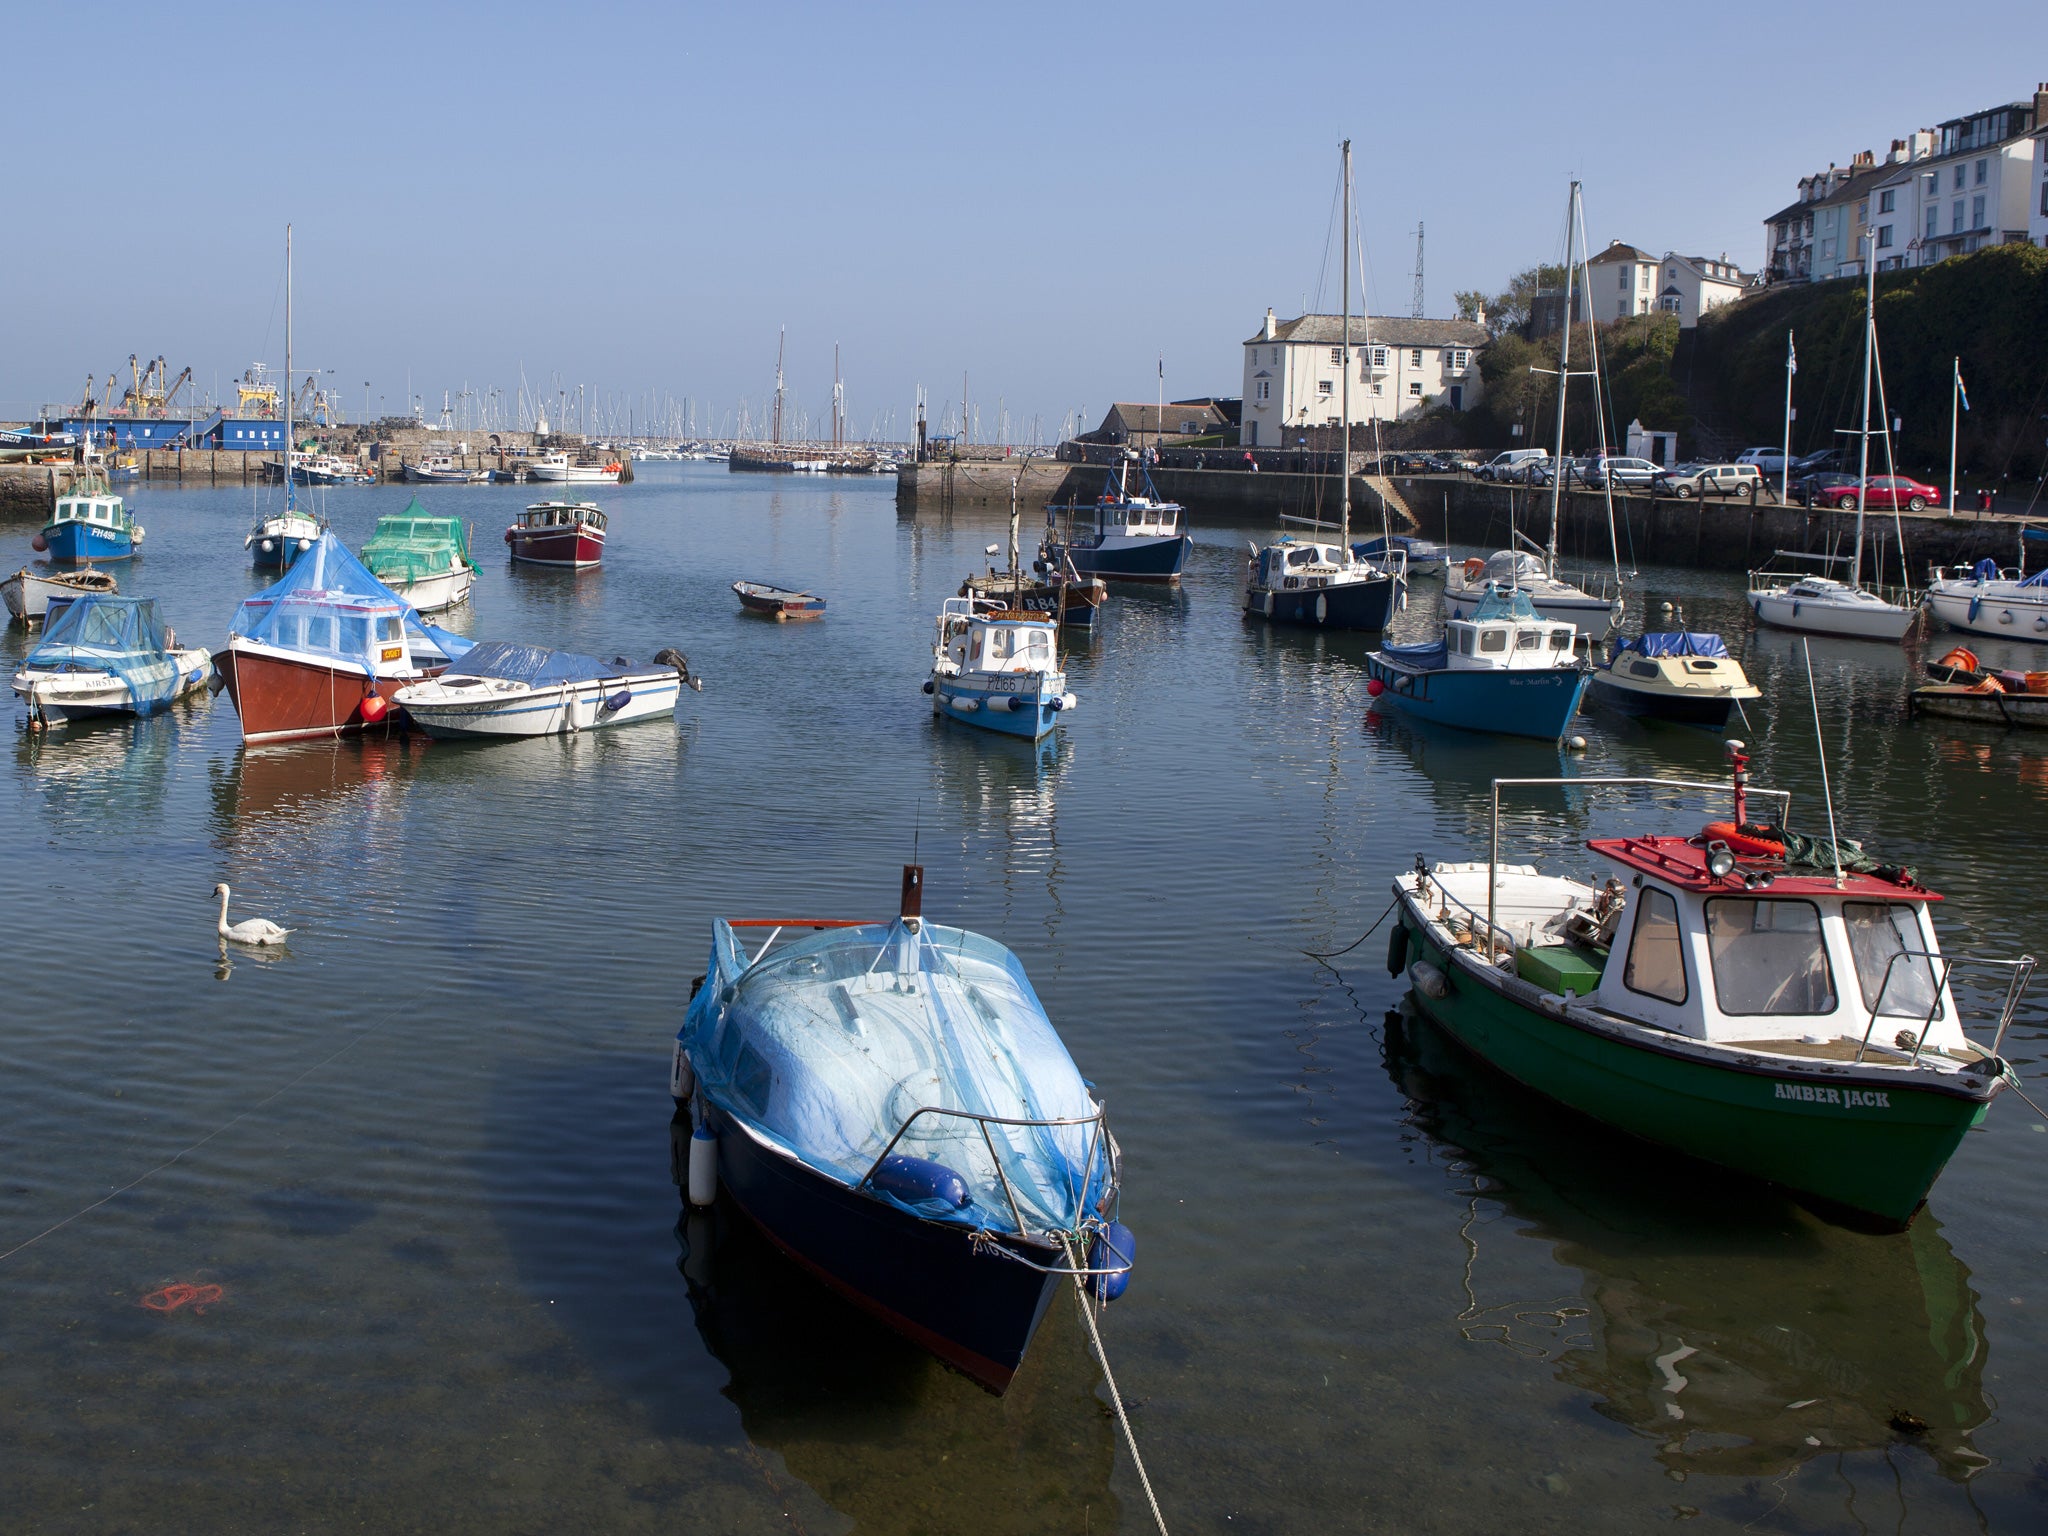 Fishing boats in the harbour of seaside town, Brixham